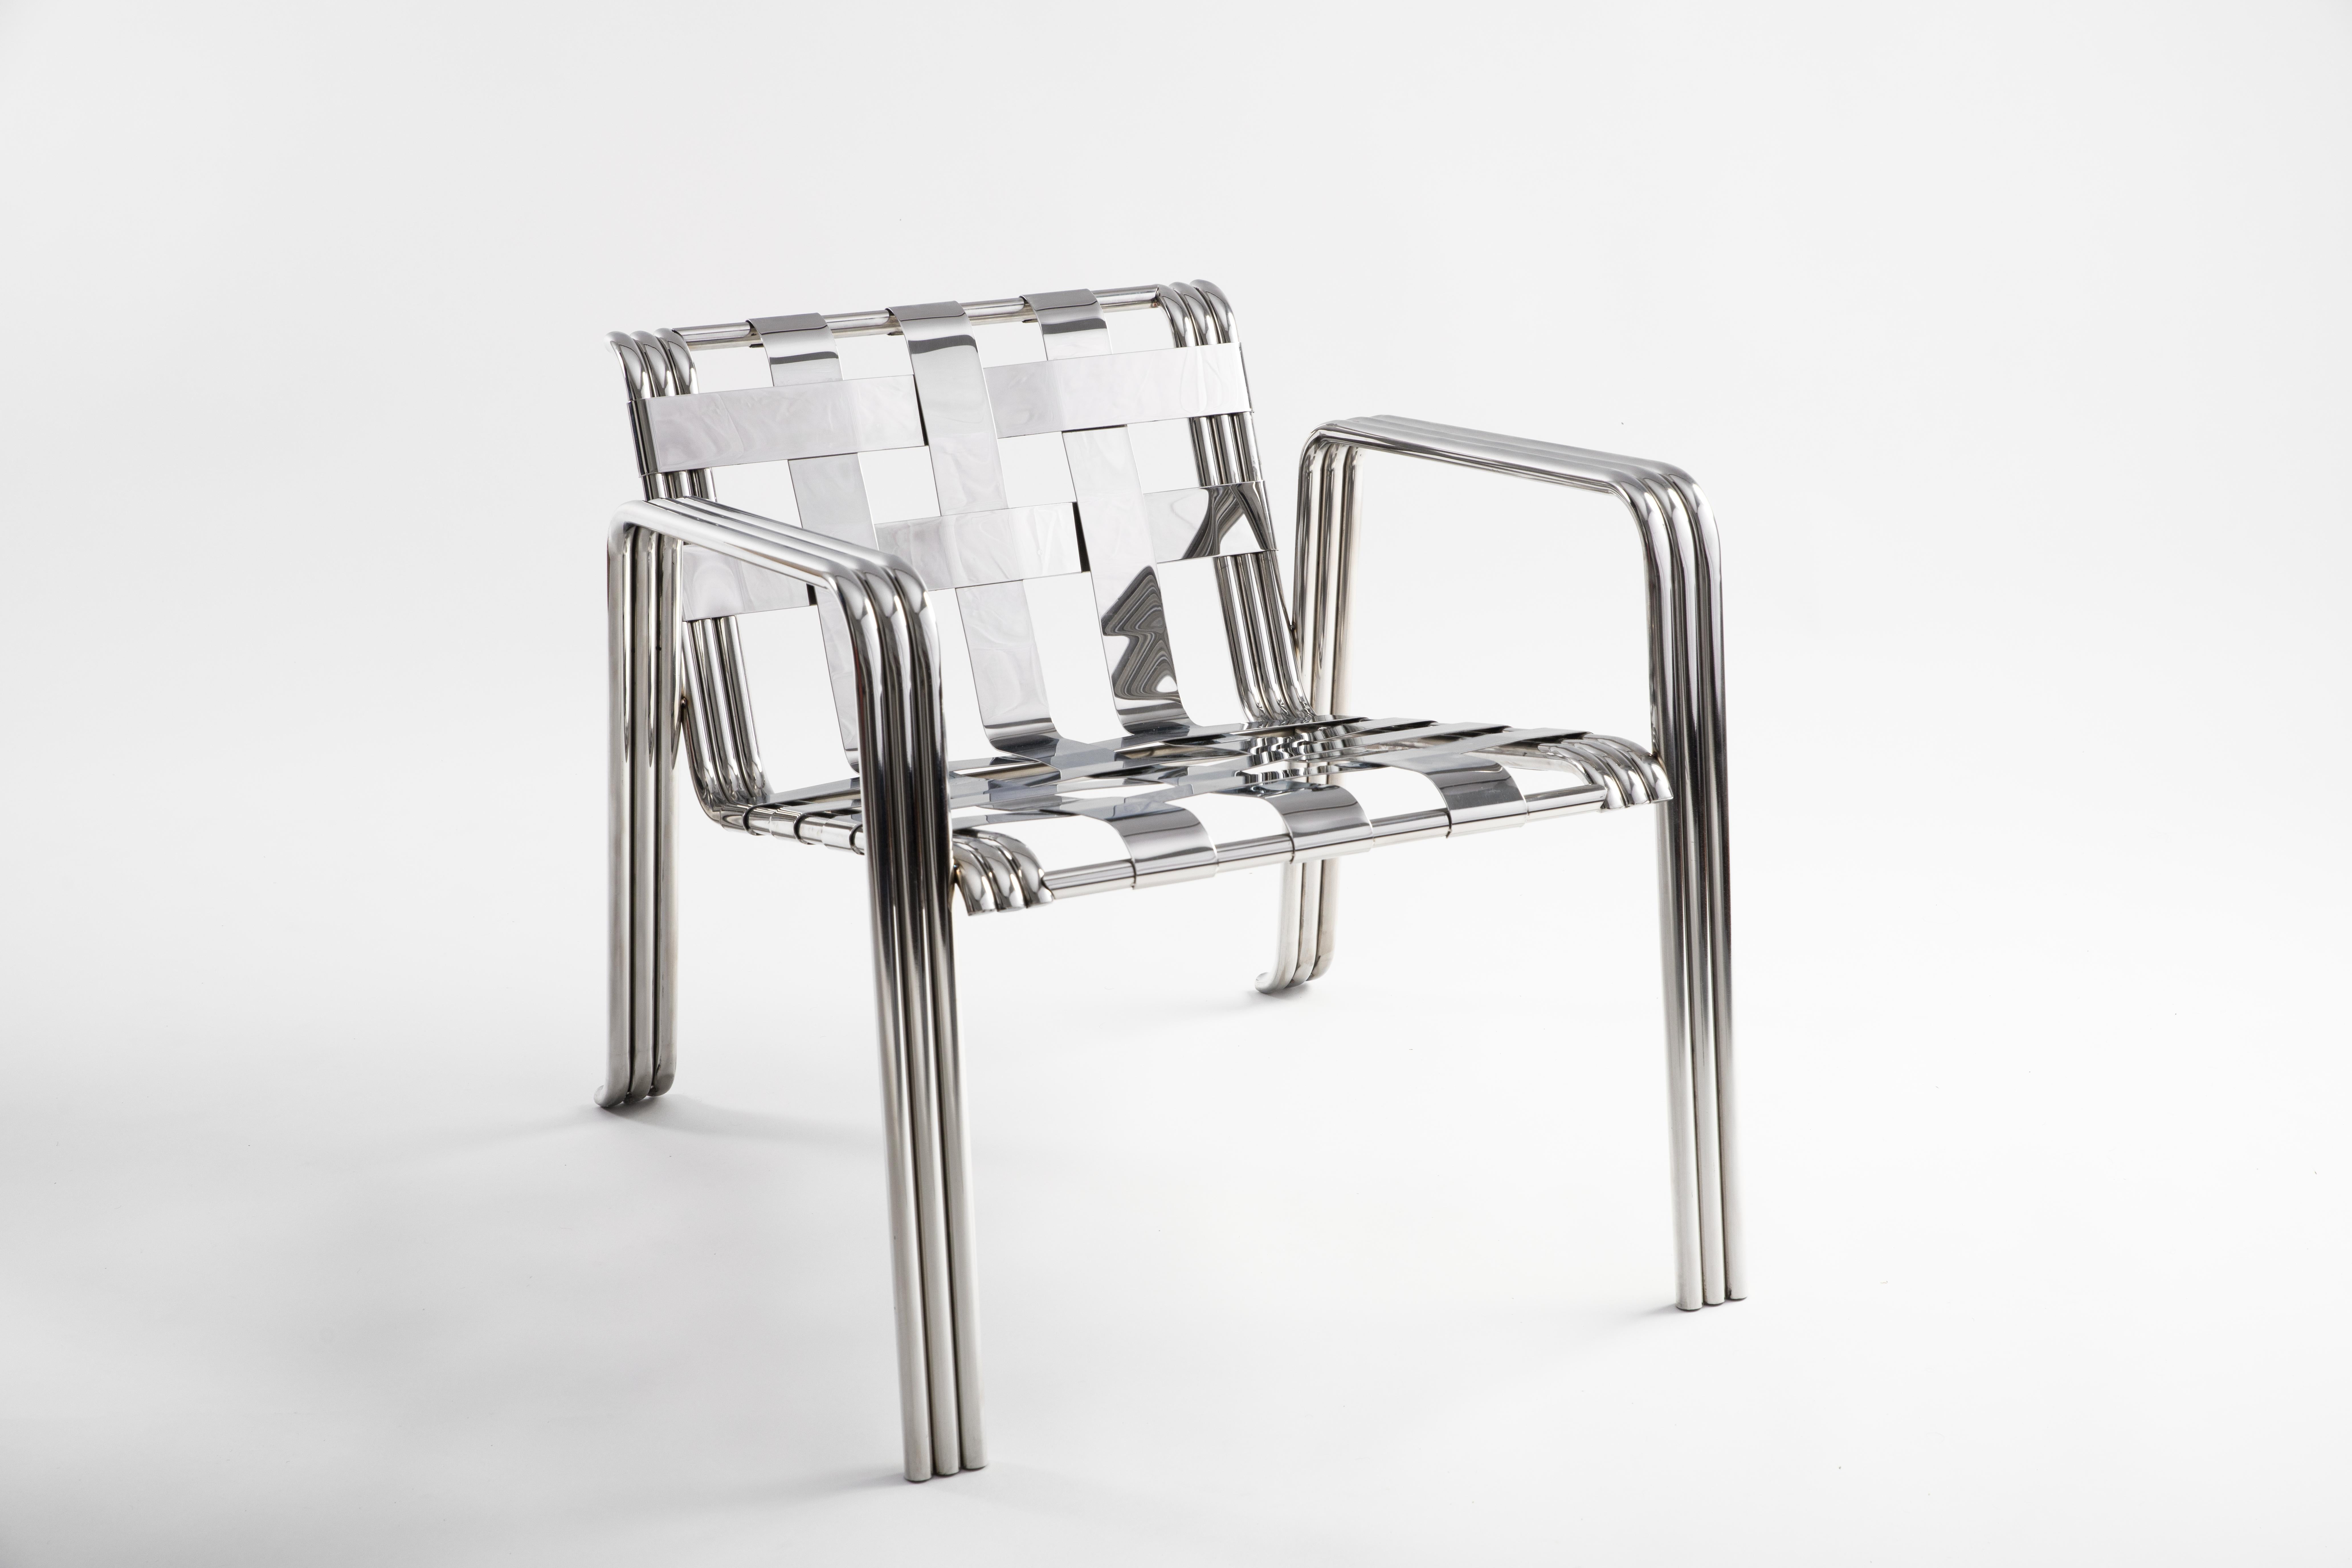 Traspade lounge chair by Testatonda
Dimensions: D 79 x W 70 x H 75 cm.
Materials: stainless steel.

The Trespade collection is the repetition of dimensions, the intertwining of materials, colors and reflections: our way of interpreting the